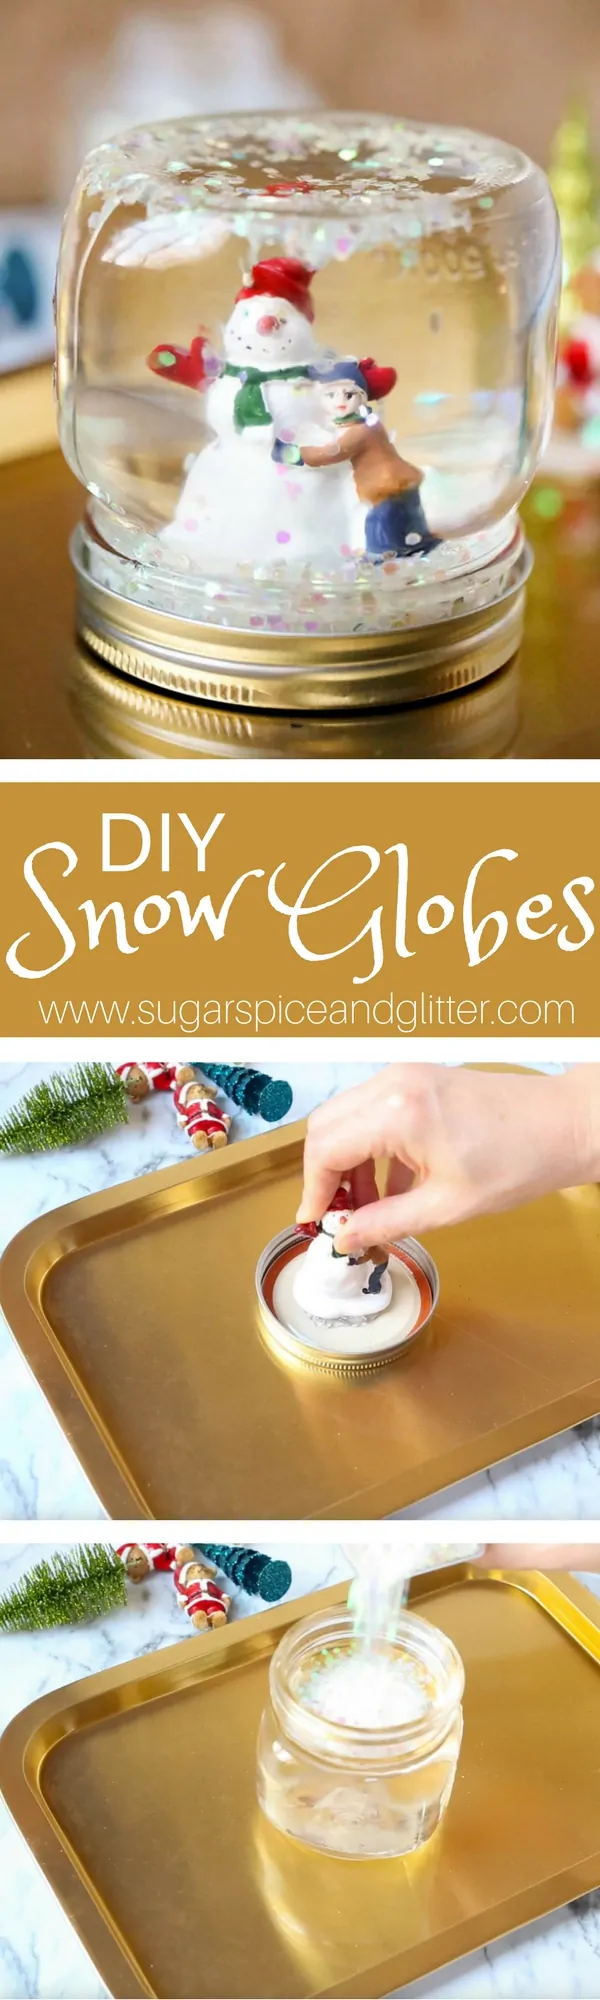 This DIY Mason Jar Snow Globe is absolutely magical craft that kids can help make! It also makes a beautiful homemade gift - customize it with favorite character figurines or travel souvenirs.